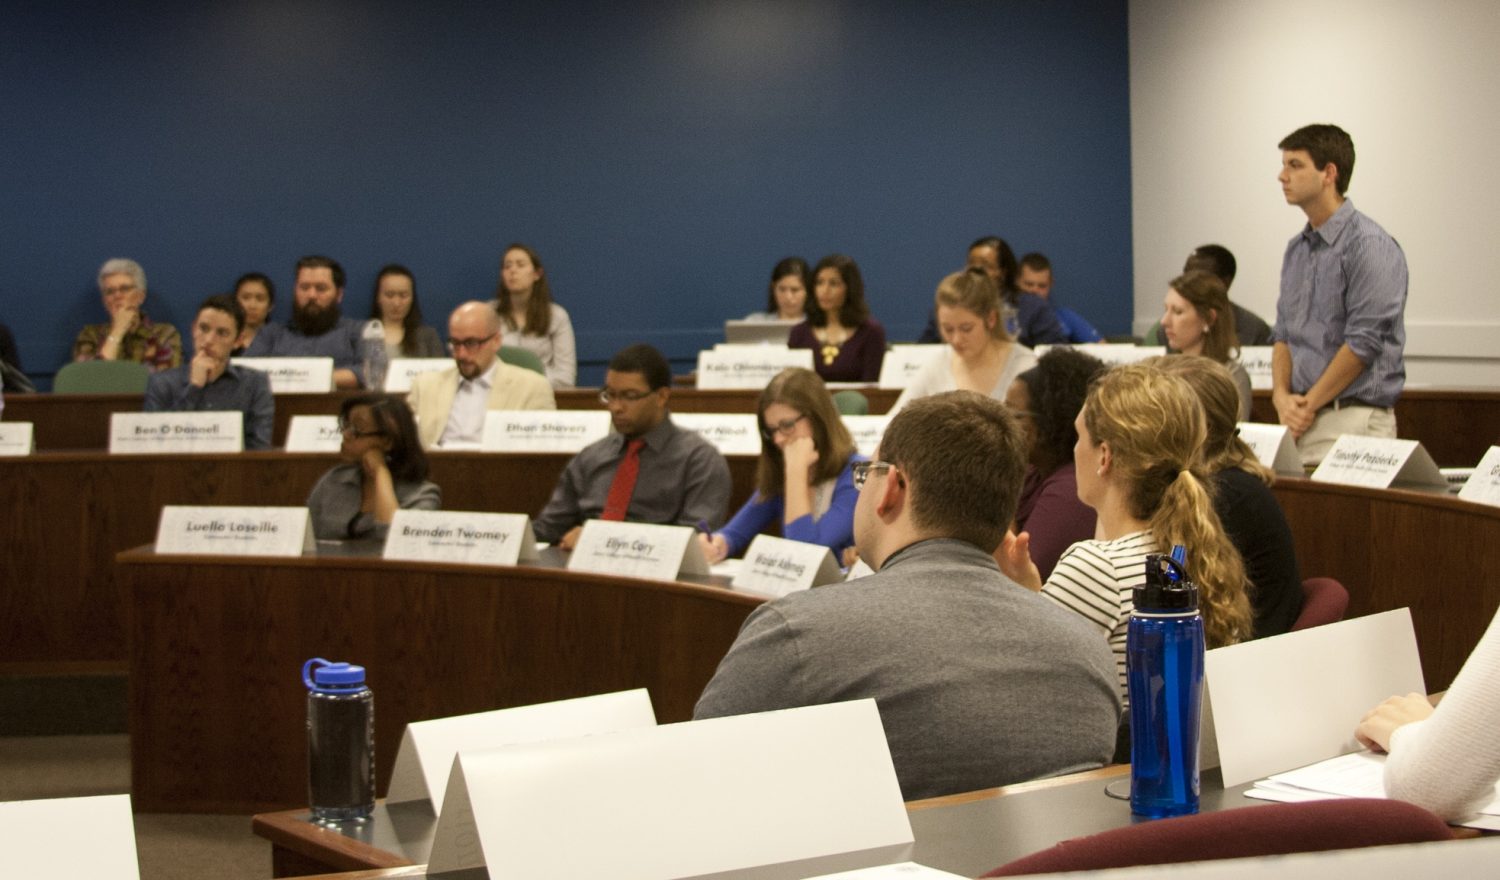 Senators seeking solutions: SGA senator Mike Degnan directs a question to Sue Chawszczewski, the Director of Campus Ministry at SLU. Chawszczewski outlined many Campus Ministry intiatives, including new mission trips. Paul Brunkhorst / Associate News Editor